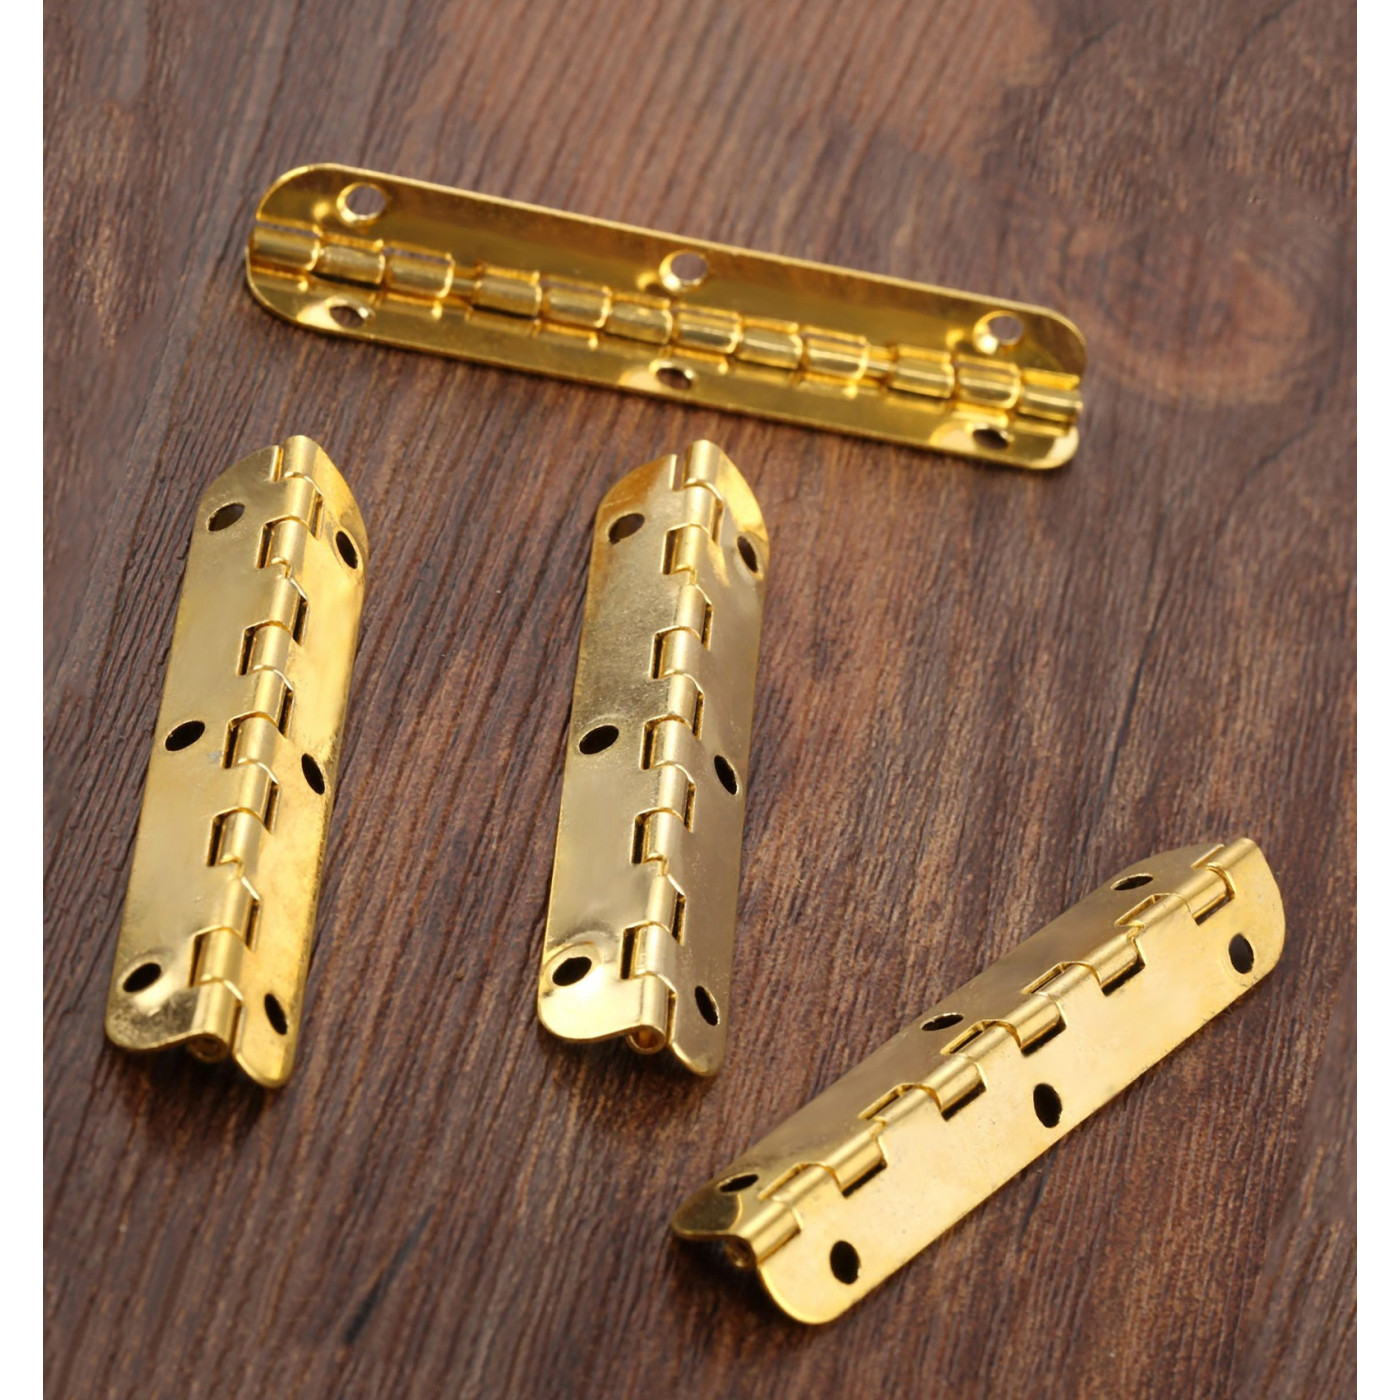 Set of 10 long hinges, (6.5 cm length, gold, max 90 degrees